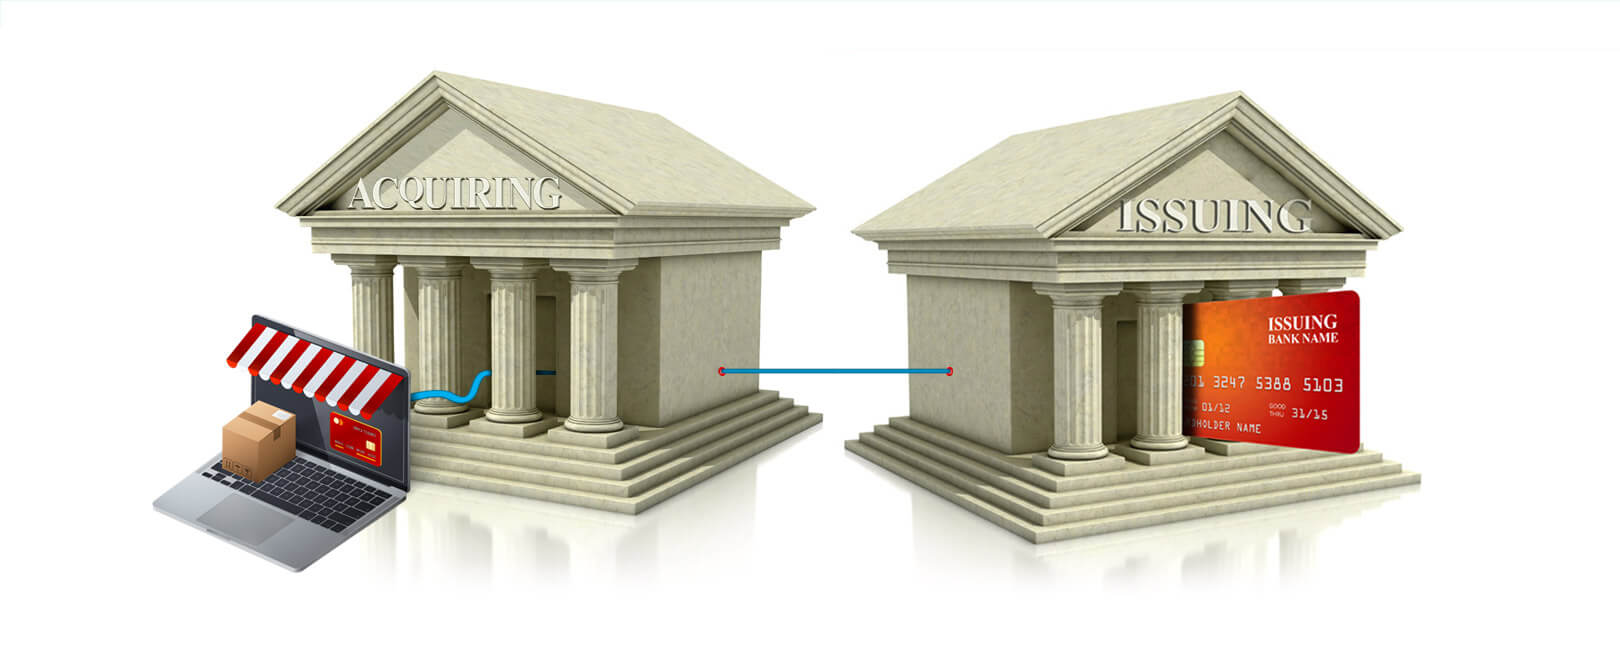 Difference Between Acquiring Bank And Issuing Bank